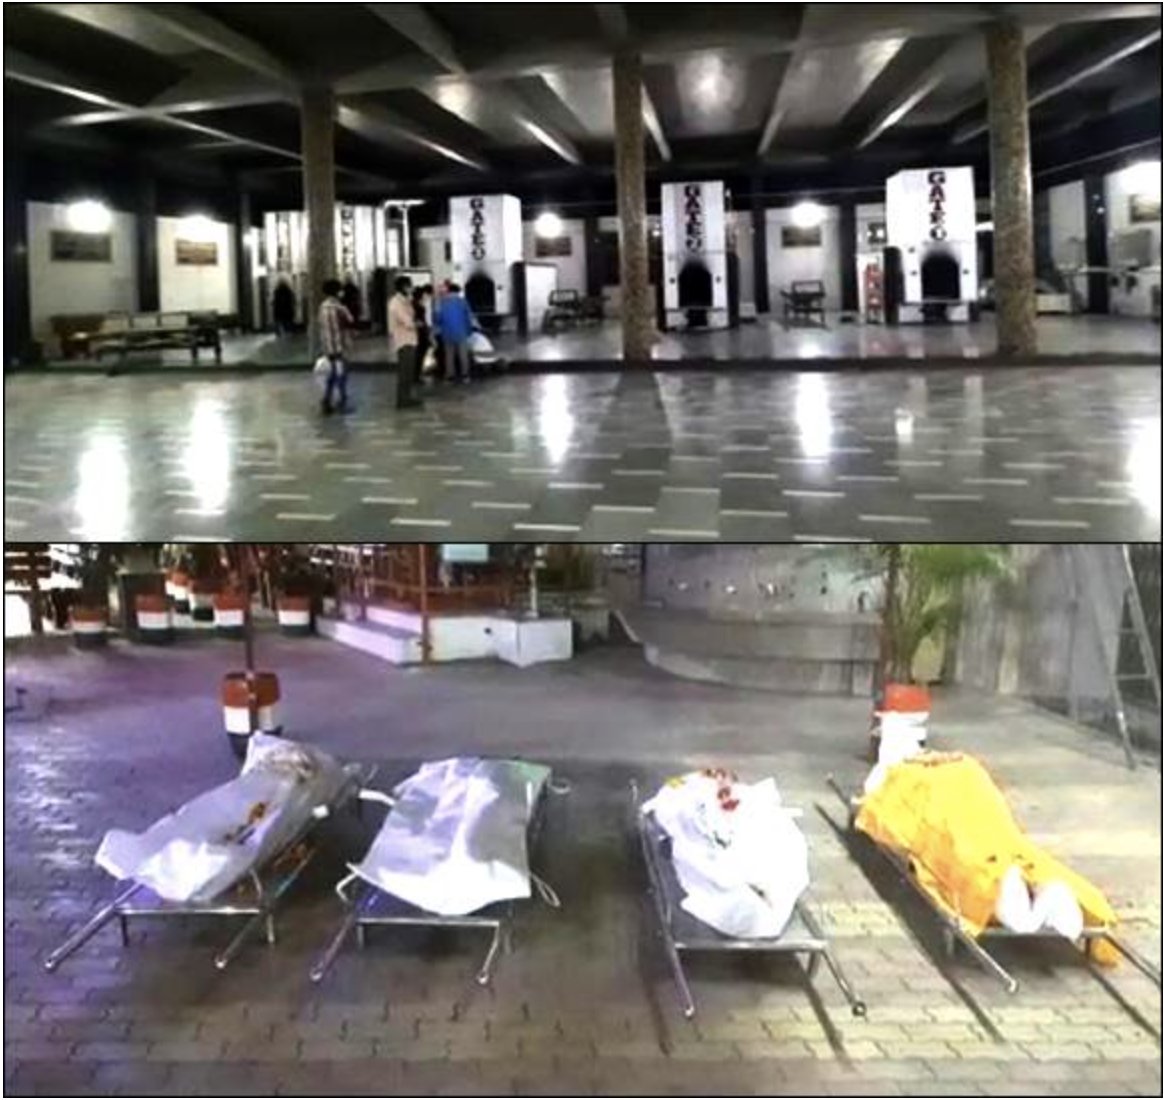 After Surat, Bardoli too sees long queues in crematoriums. Bardoli crematoriums have allocated 3 gas furnaces for corona dead bodies. District authorities declare 1-2 deaths but each crematorium conducts 10-12 cremations daily in Bardoli only apart from Surat.  #GujaratHorror